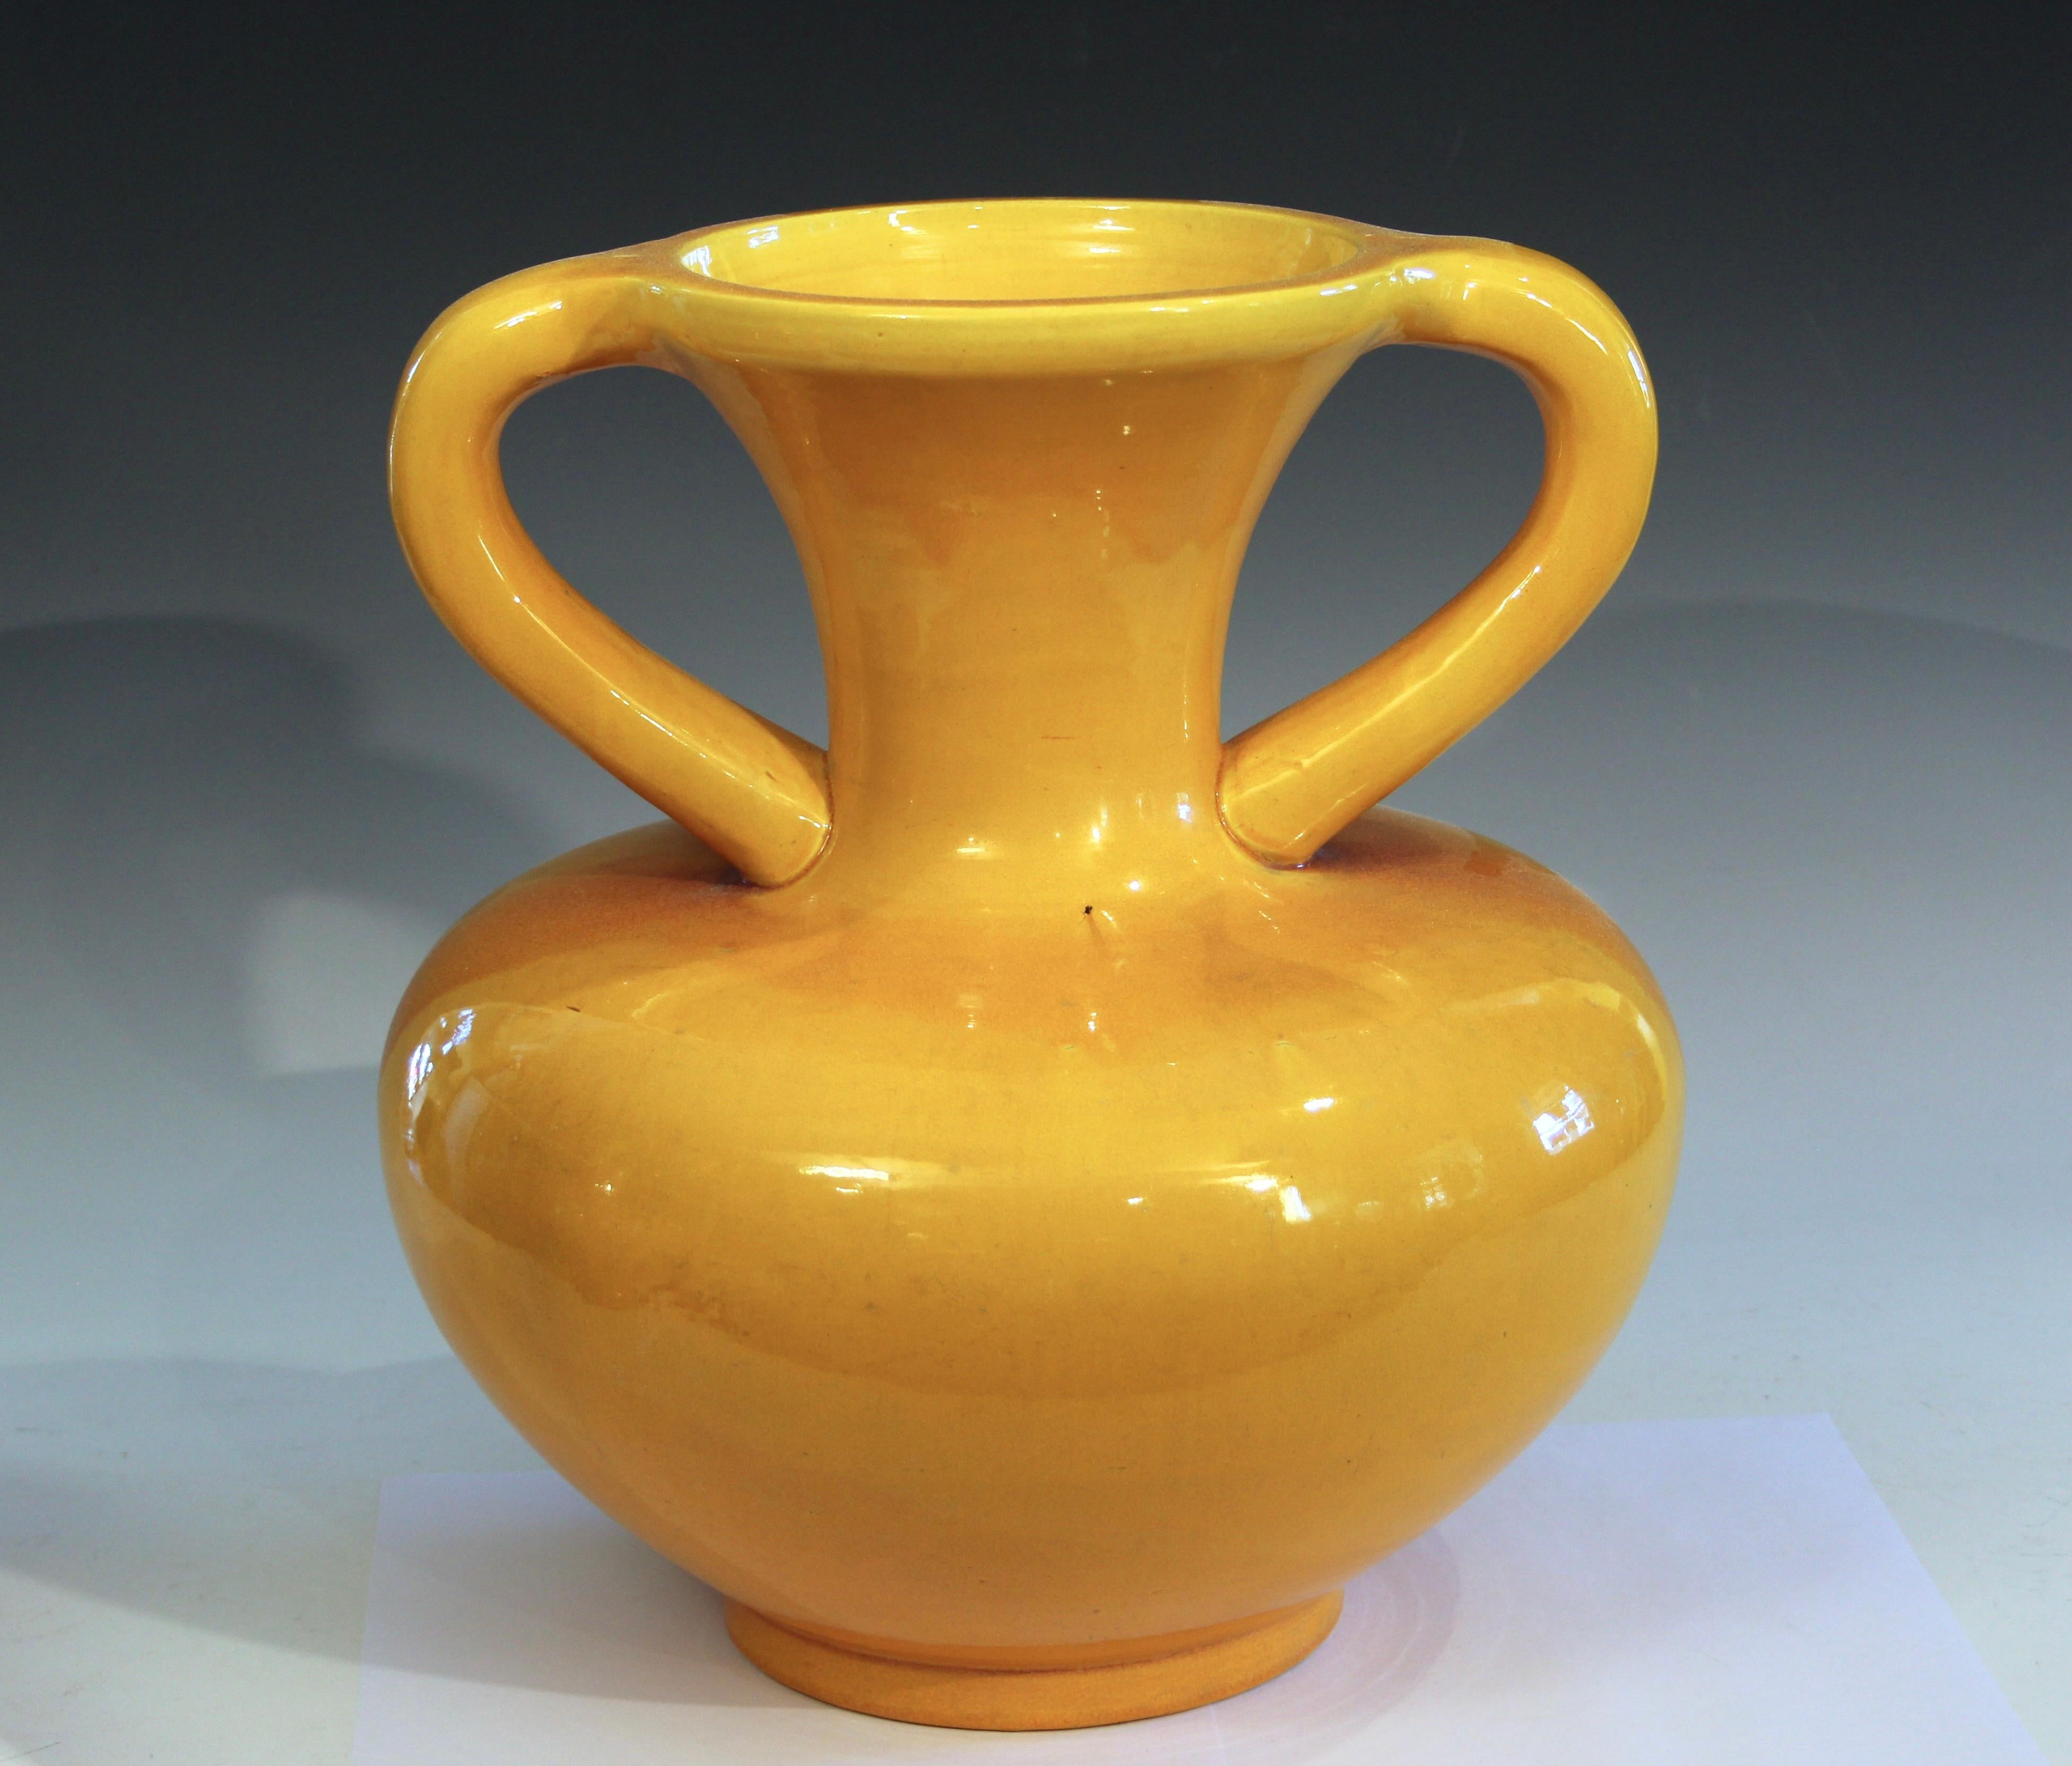 Large Awaji pottery Arts and Crafts vase in drawstring purse form with golden yellow monochrome glaze, circa 1920. 14